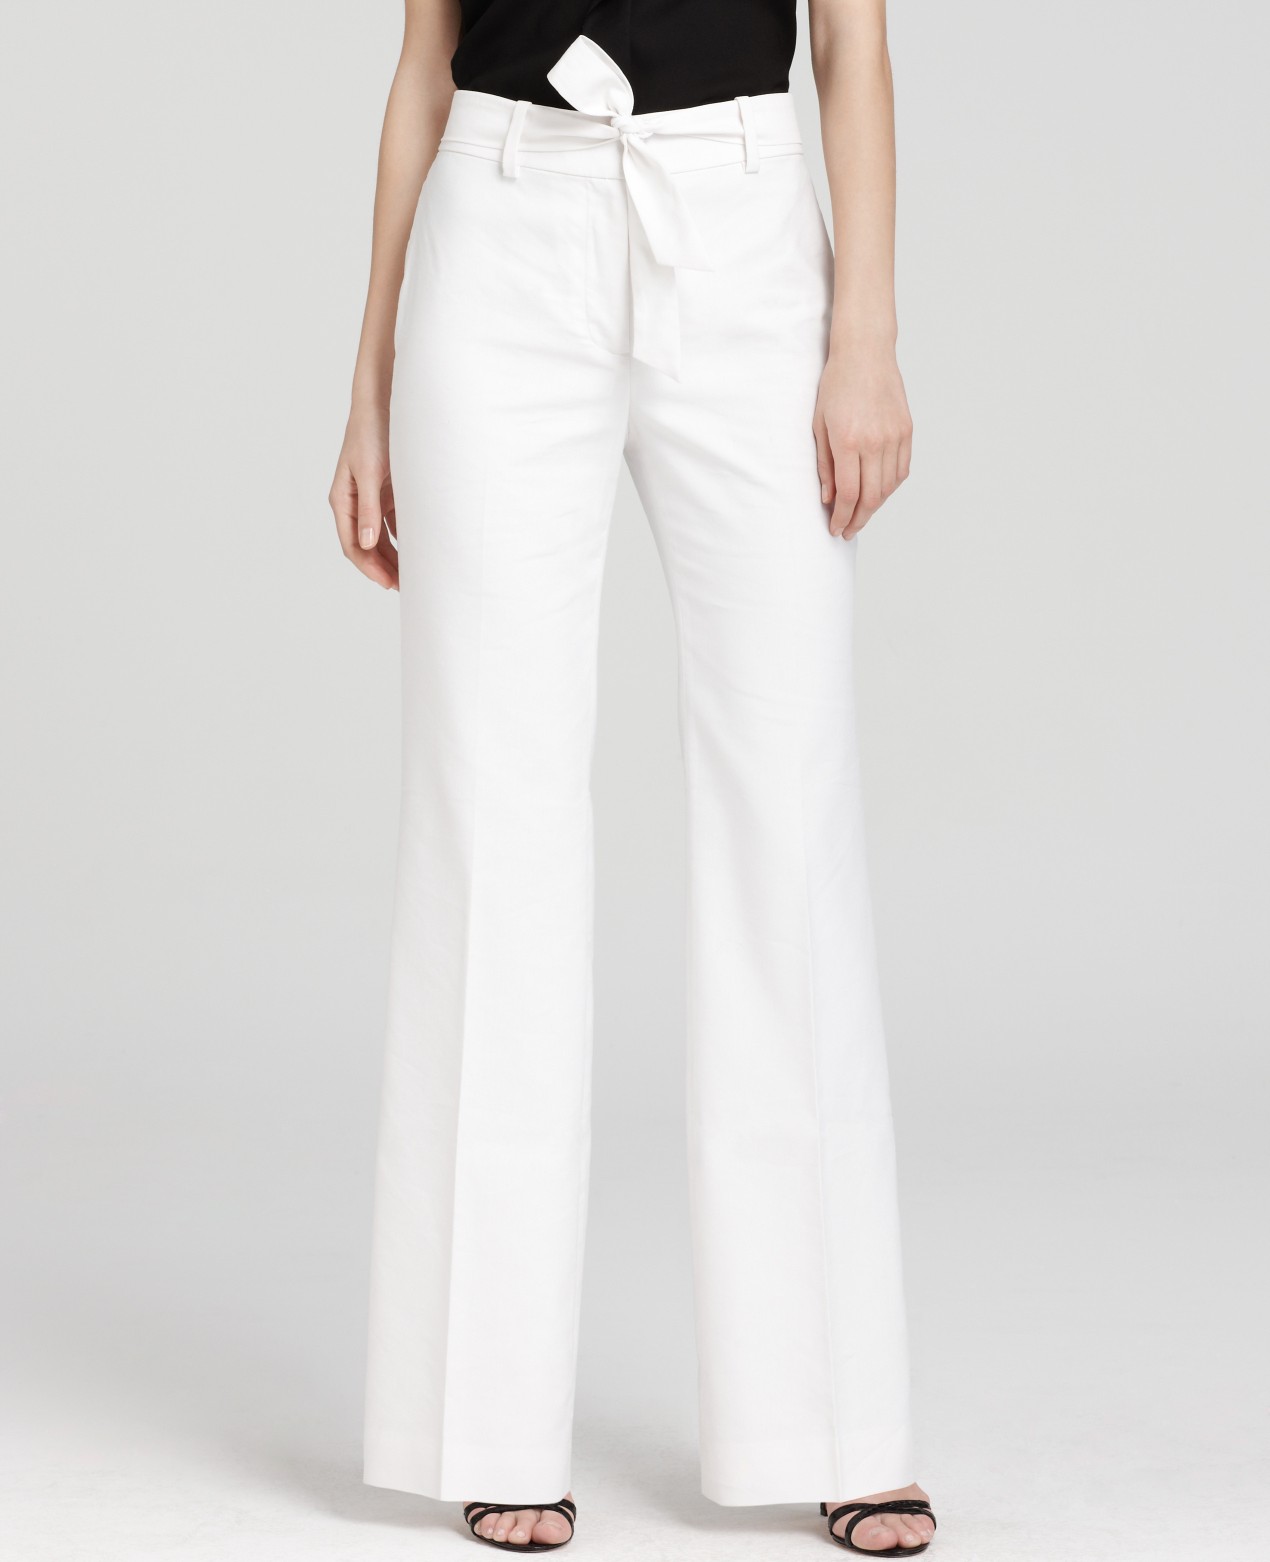 Lyst - Ann Taylor Tall Stretch Linen Twill Wide Leg Pants with Sash in ...